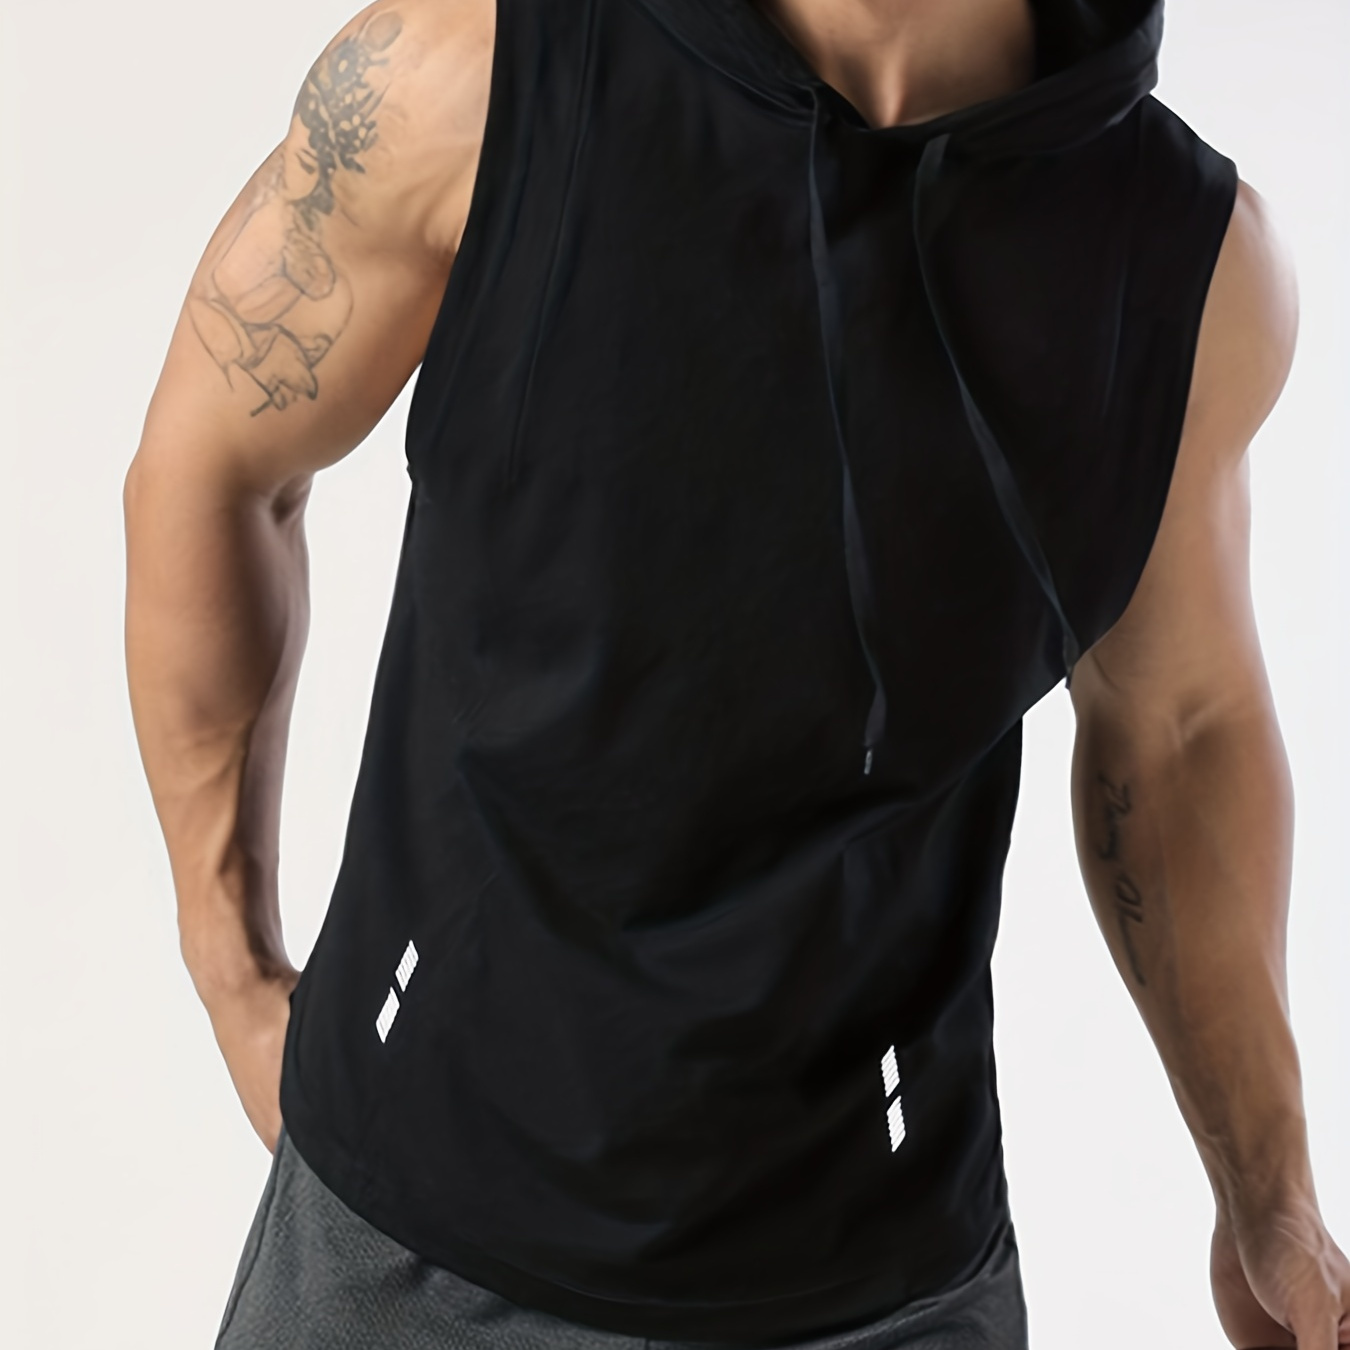 

Men's Sleeveless Drawstring Hooded Vest With Reflective Patterns Activewear Tank Top For Gym Workout